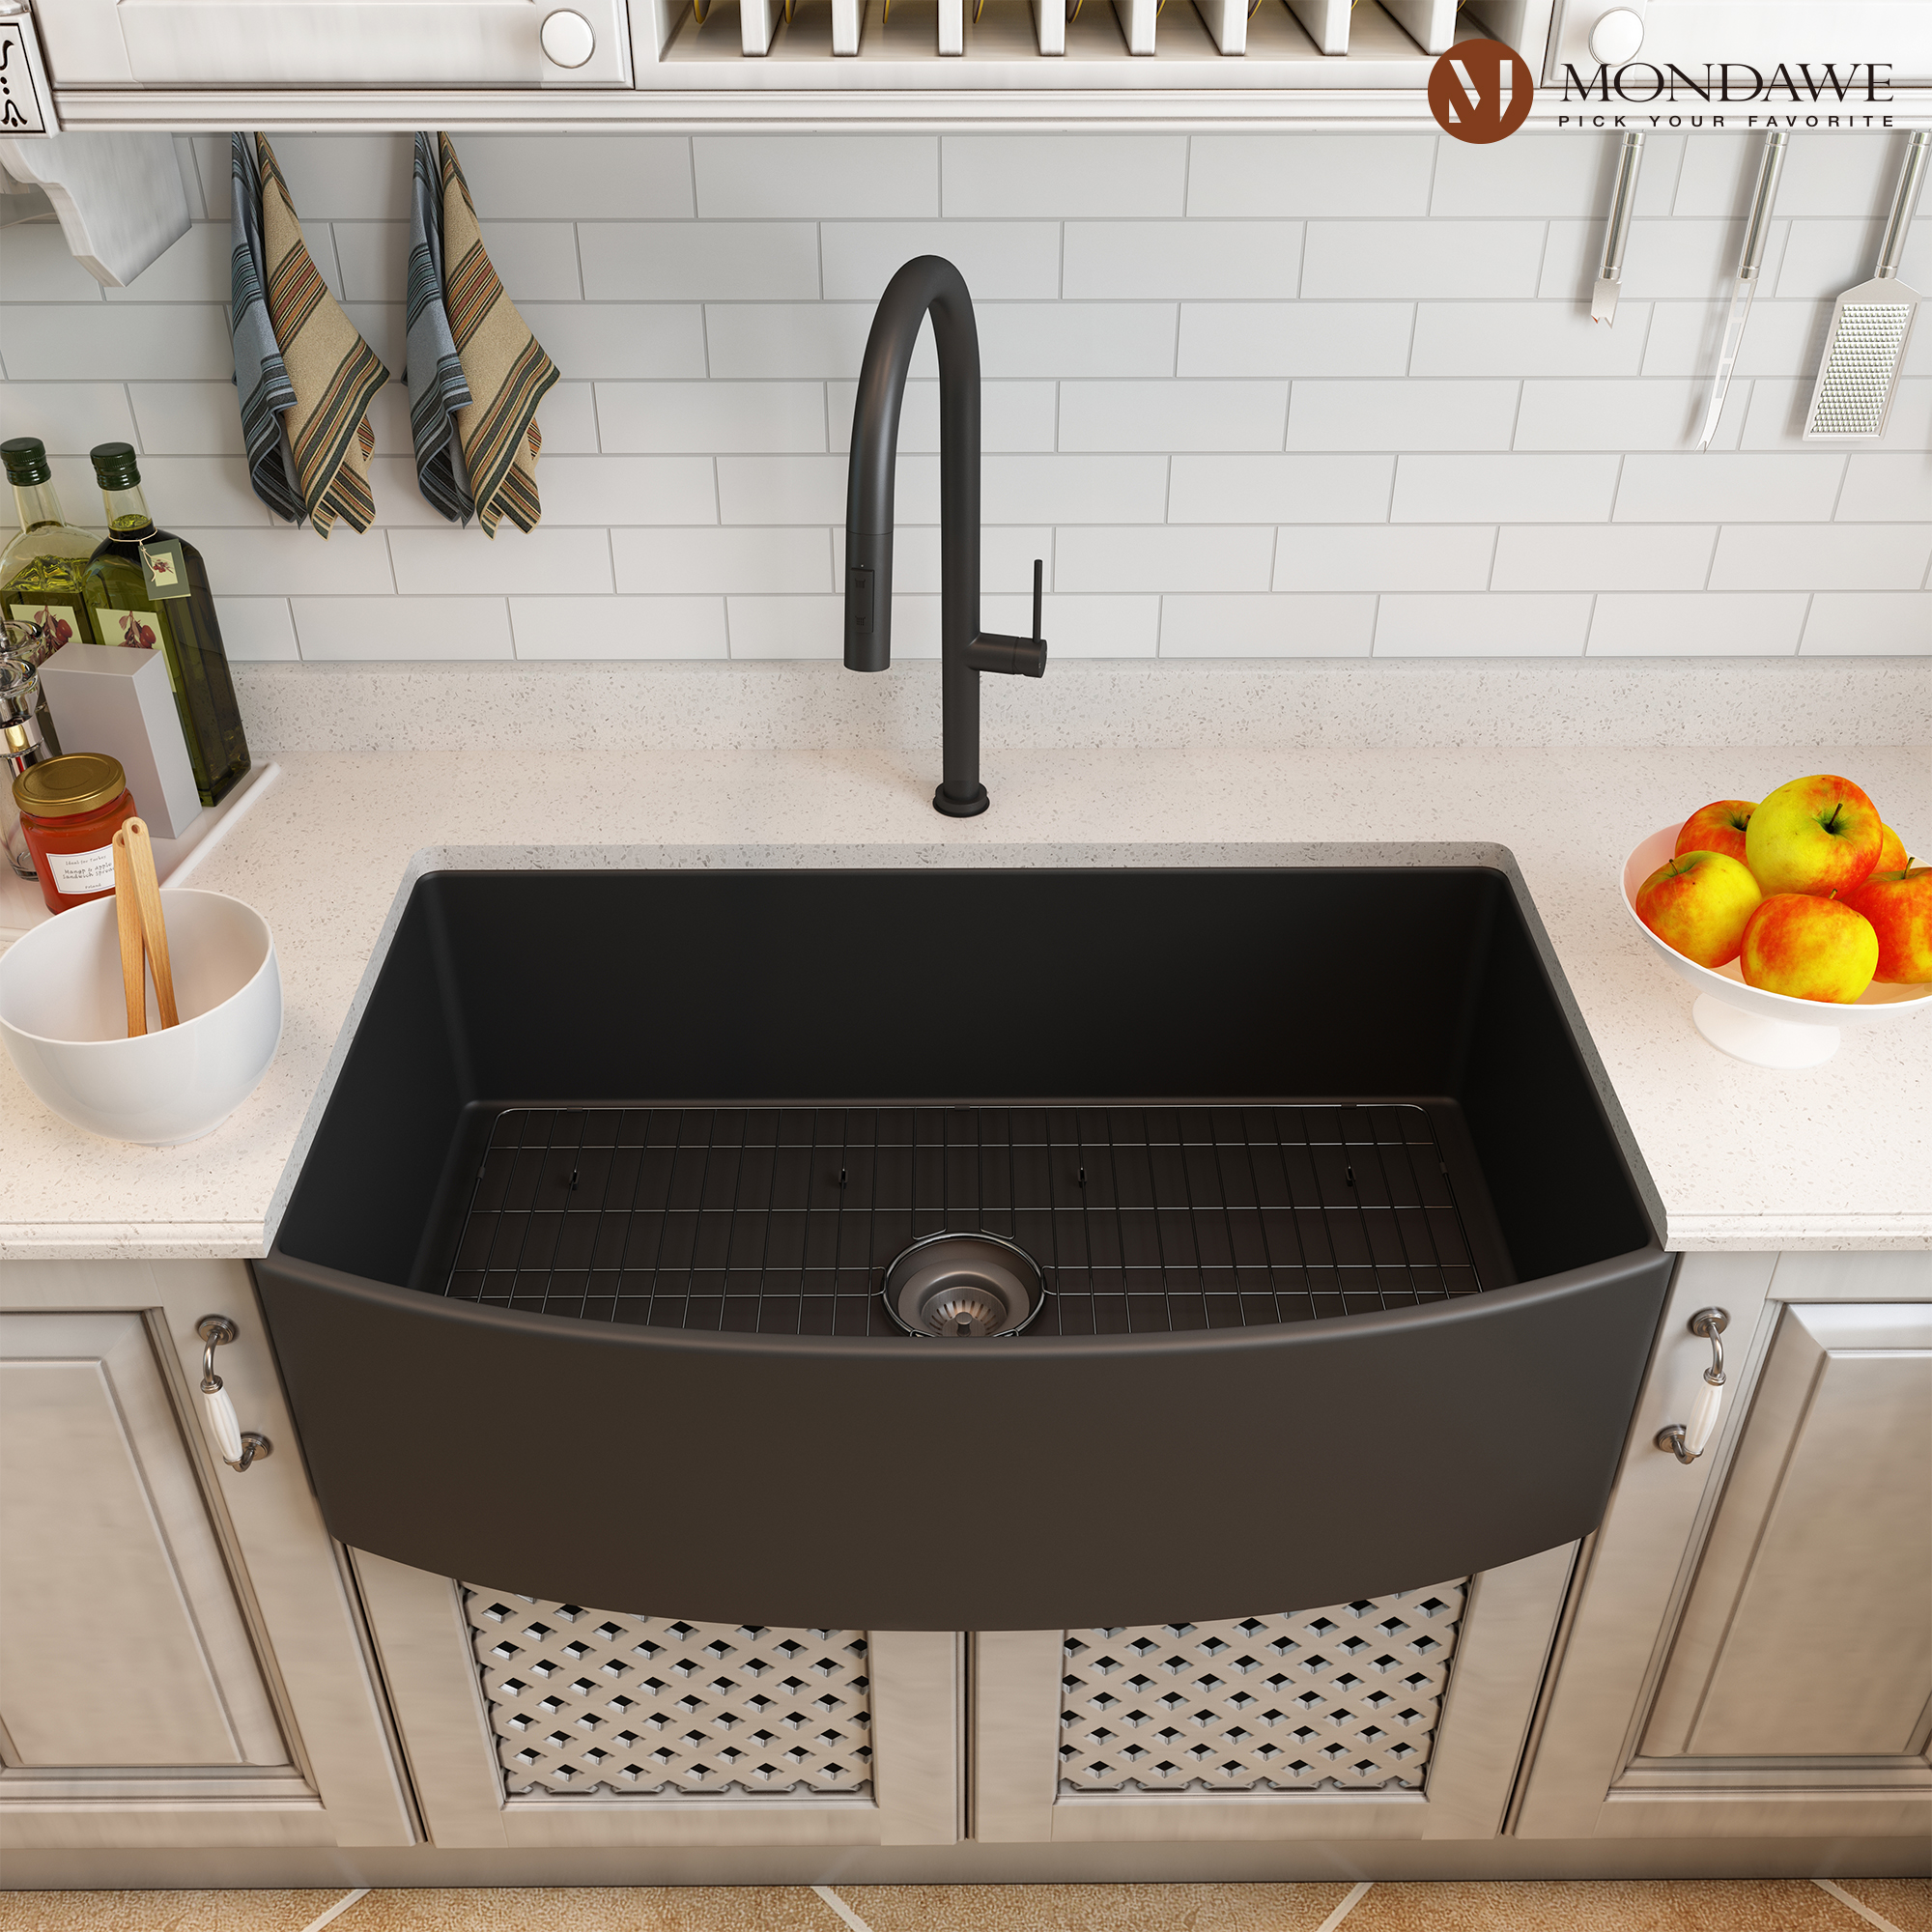 Farmhouse 33 in. single bowl fireclay kitchen sink comes with pull-down faucet-Mondawe